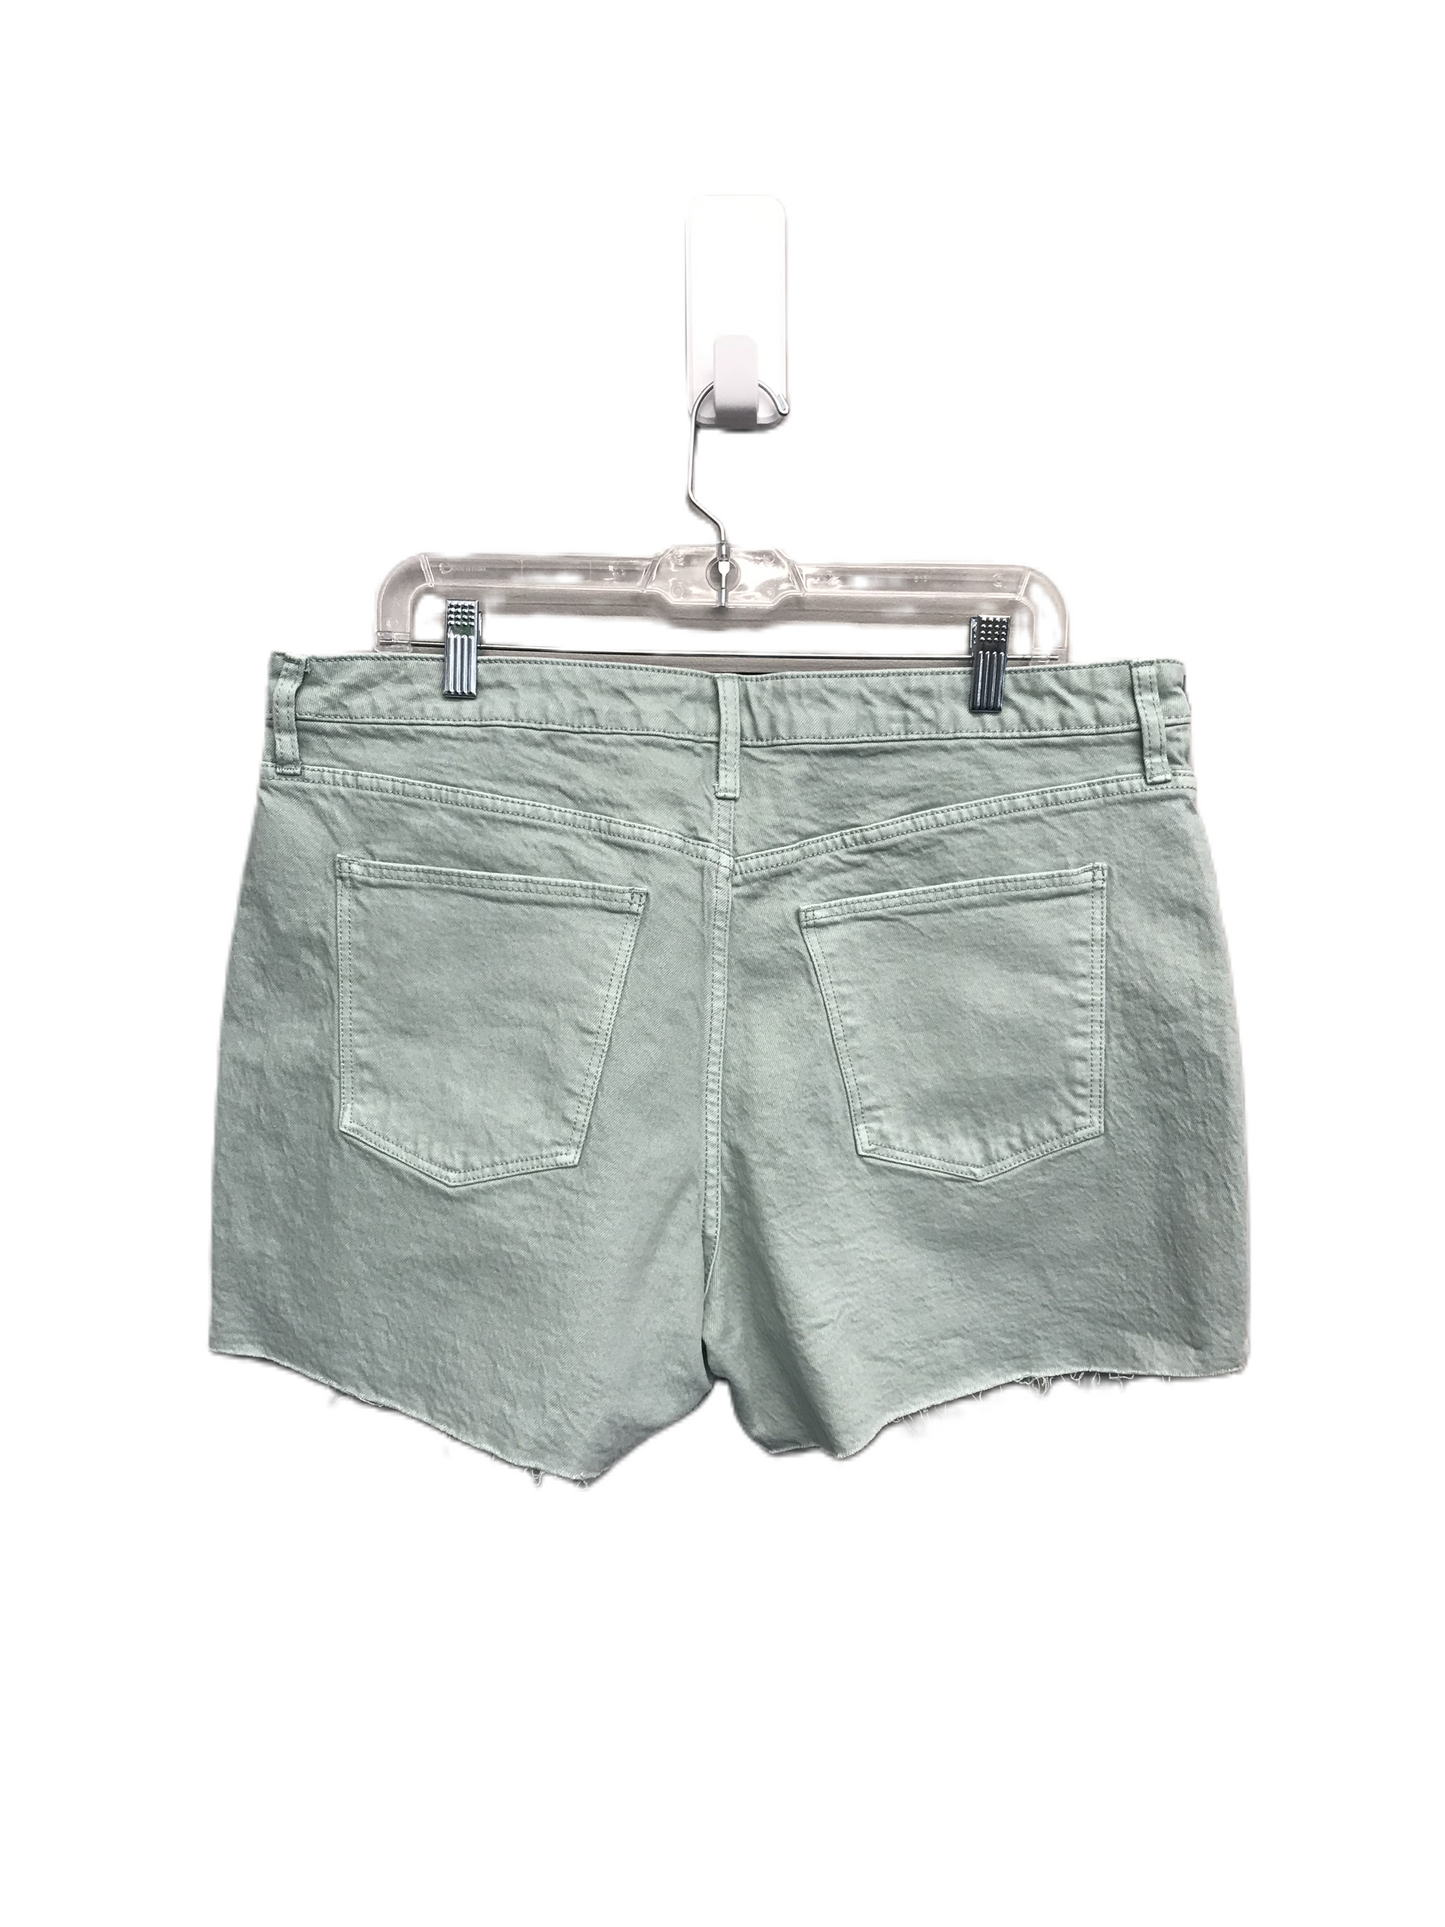 Green Shorts By Universal Thread, Size: 16